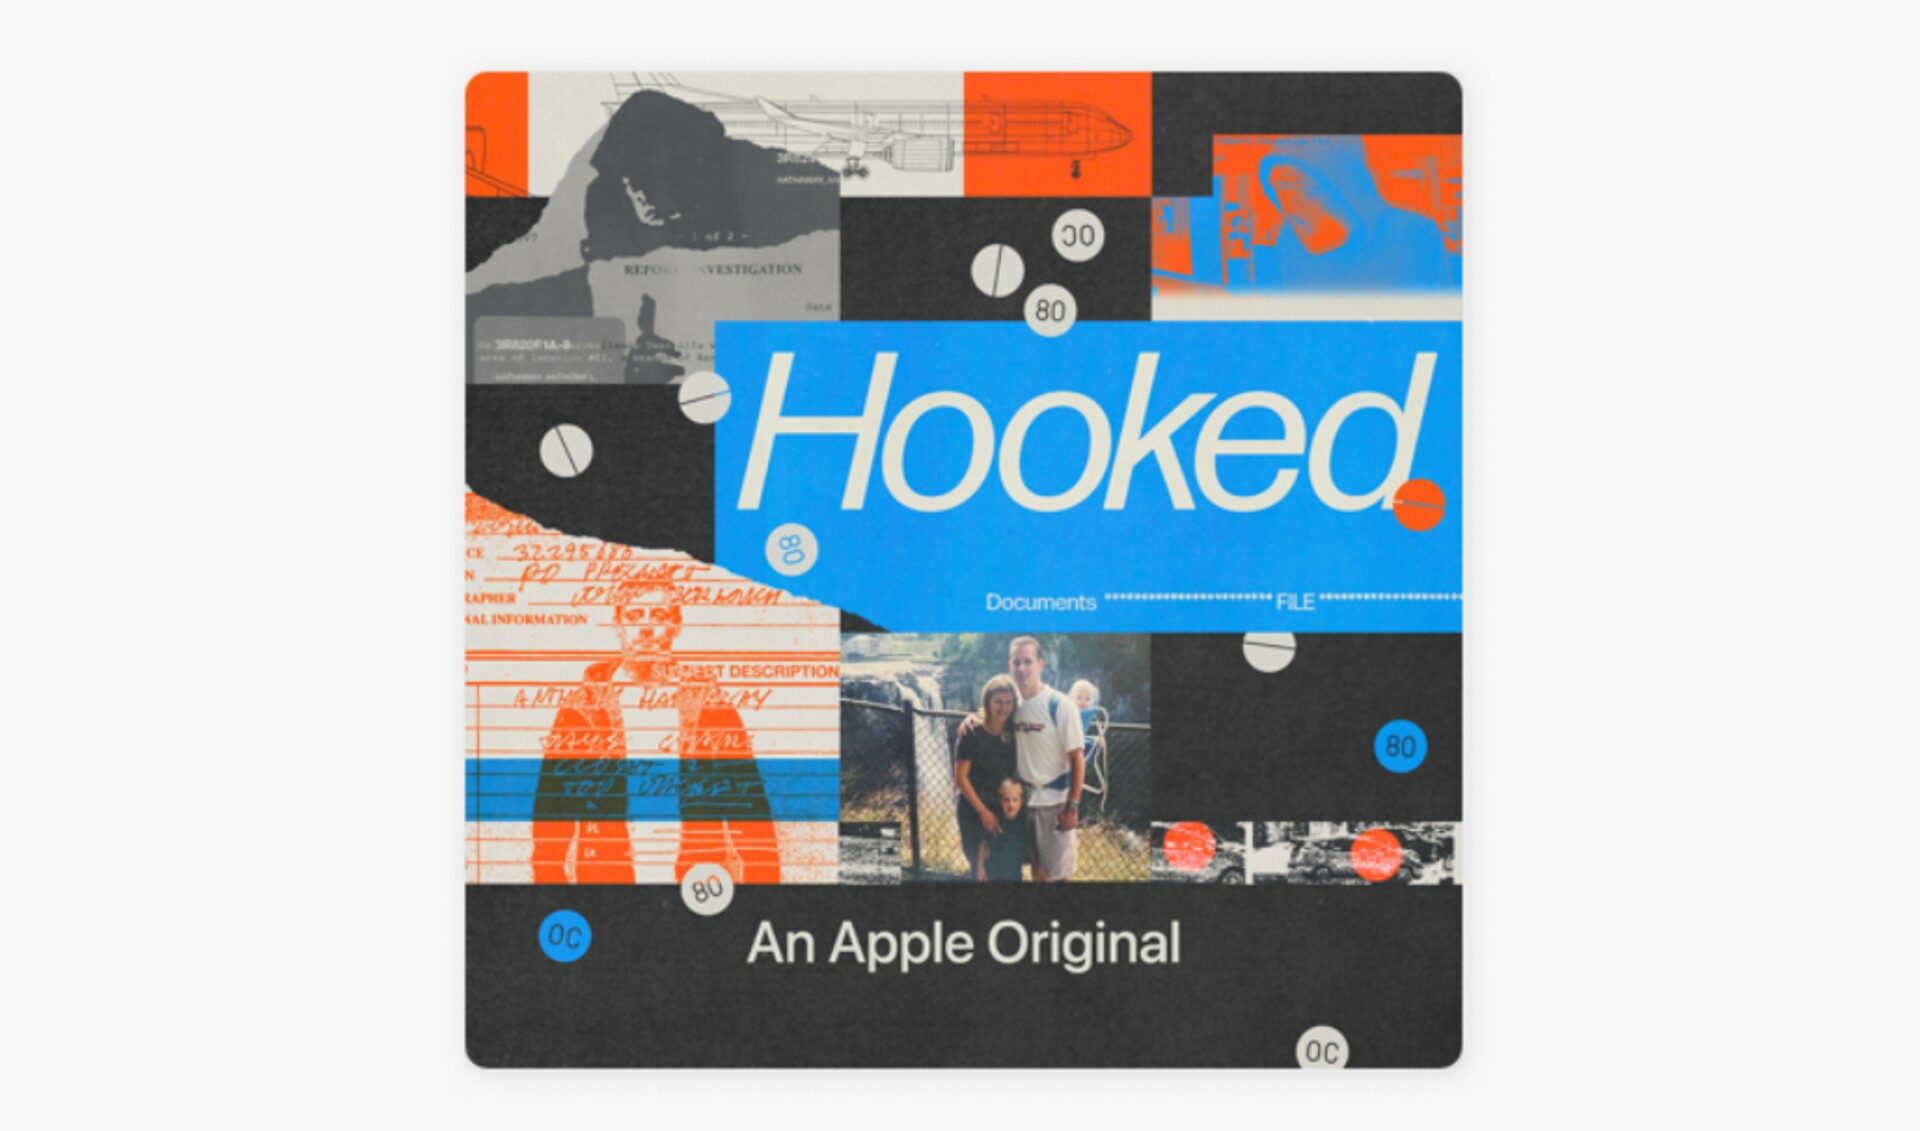 Apple Drops First Original Podcast, ‘Hooked’, With Campside Media